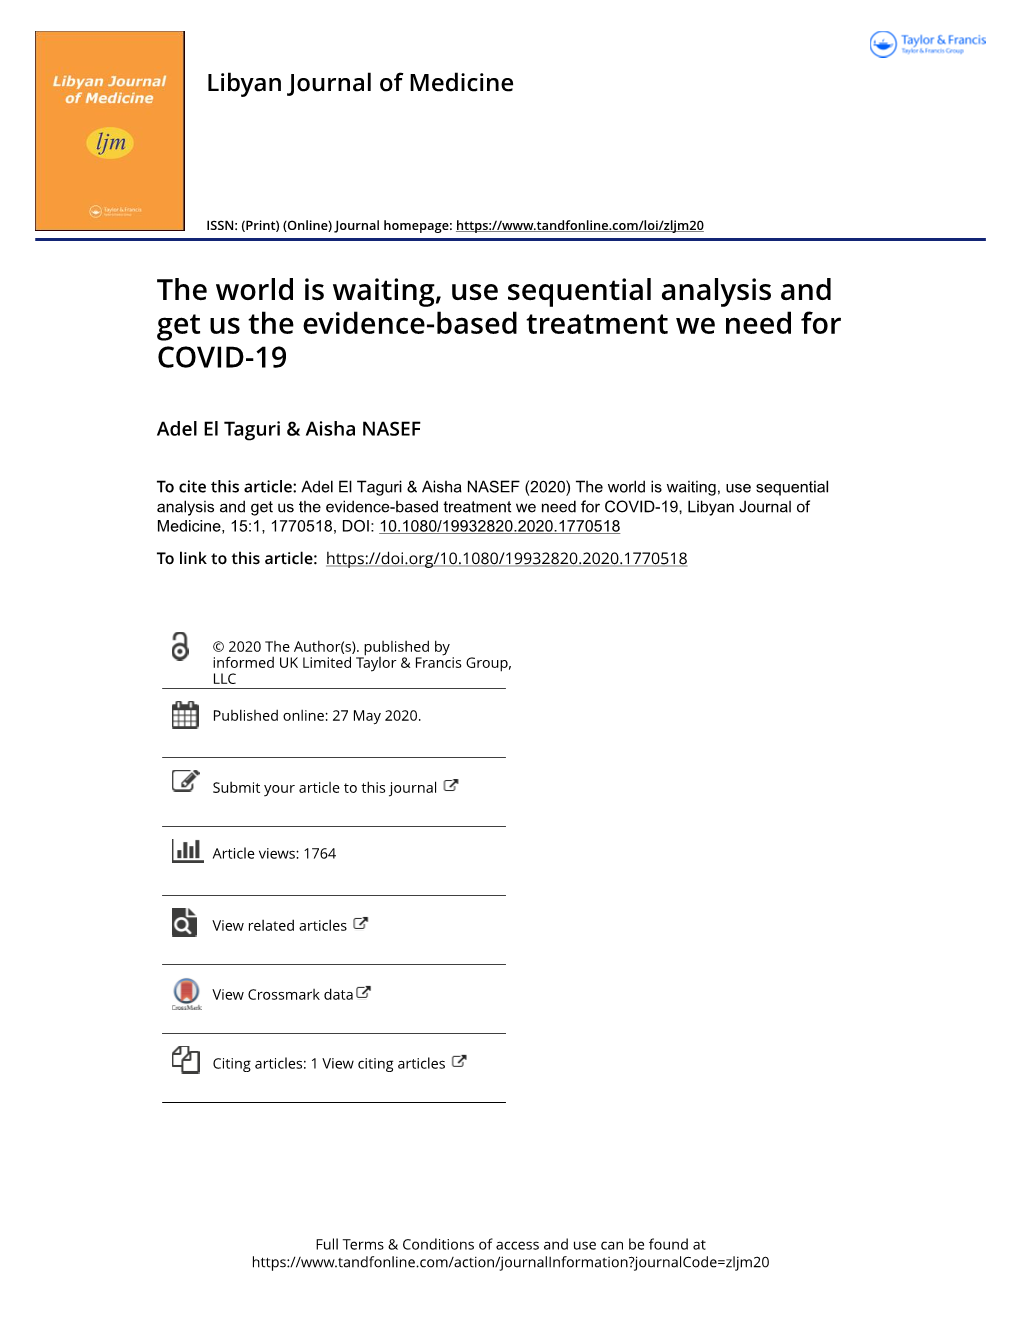 The World Is Waiting, Use Sequential Analysis and Get Us the Evidence-Based Treatment We Need for COVID-19